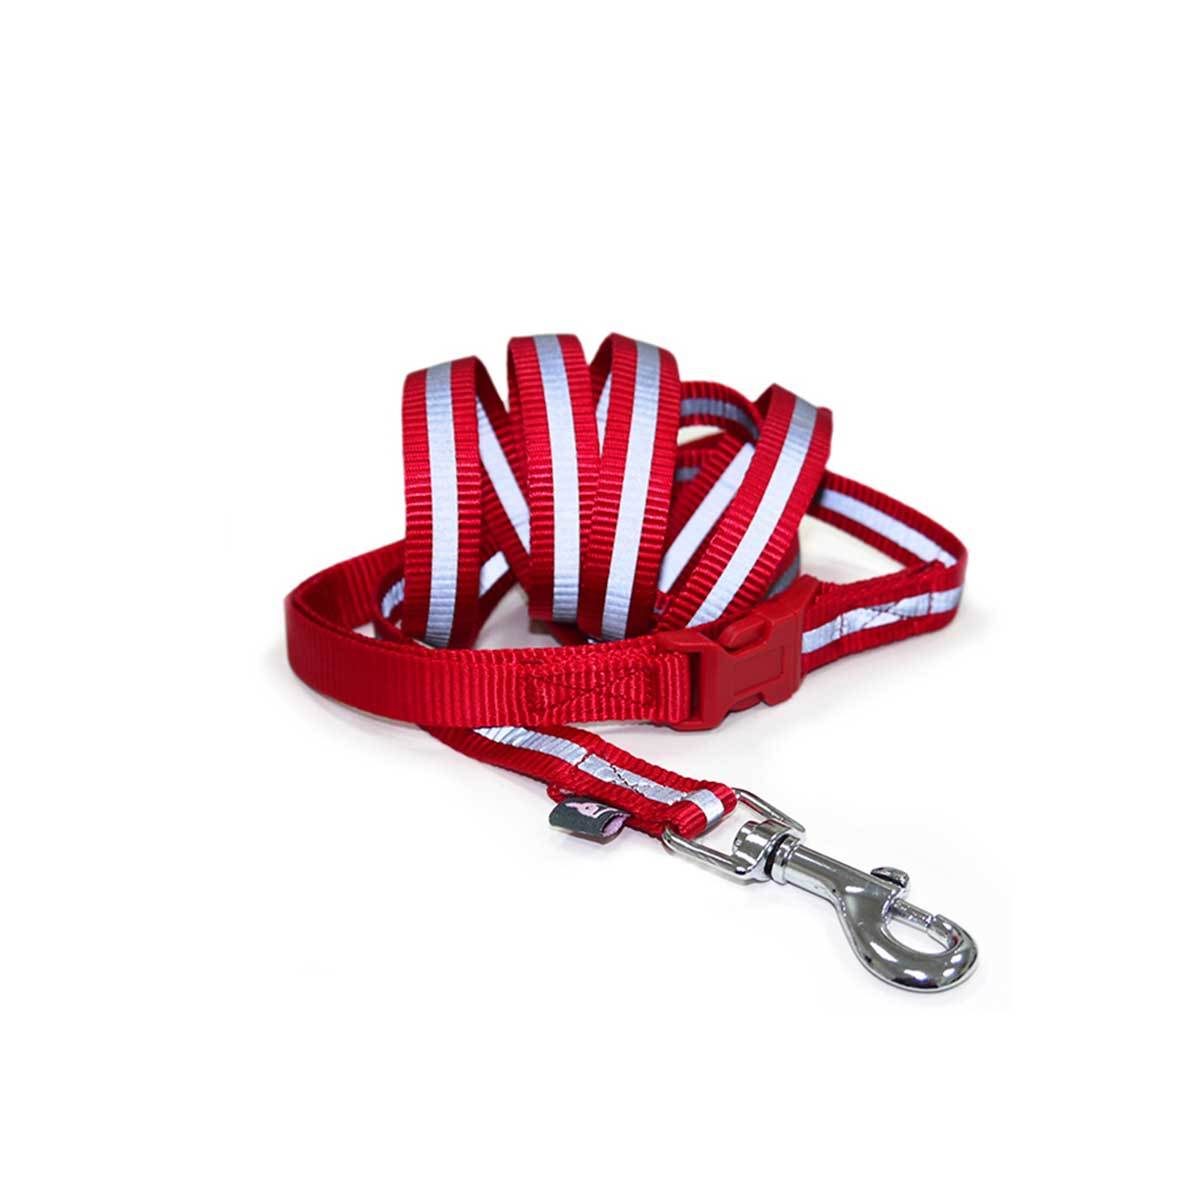 SnapGO Leash in Red | Pawlicious & Company